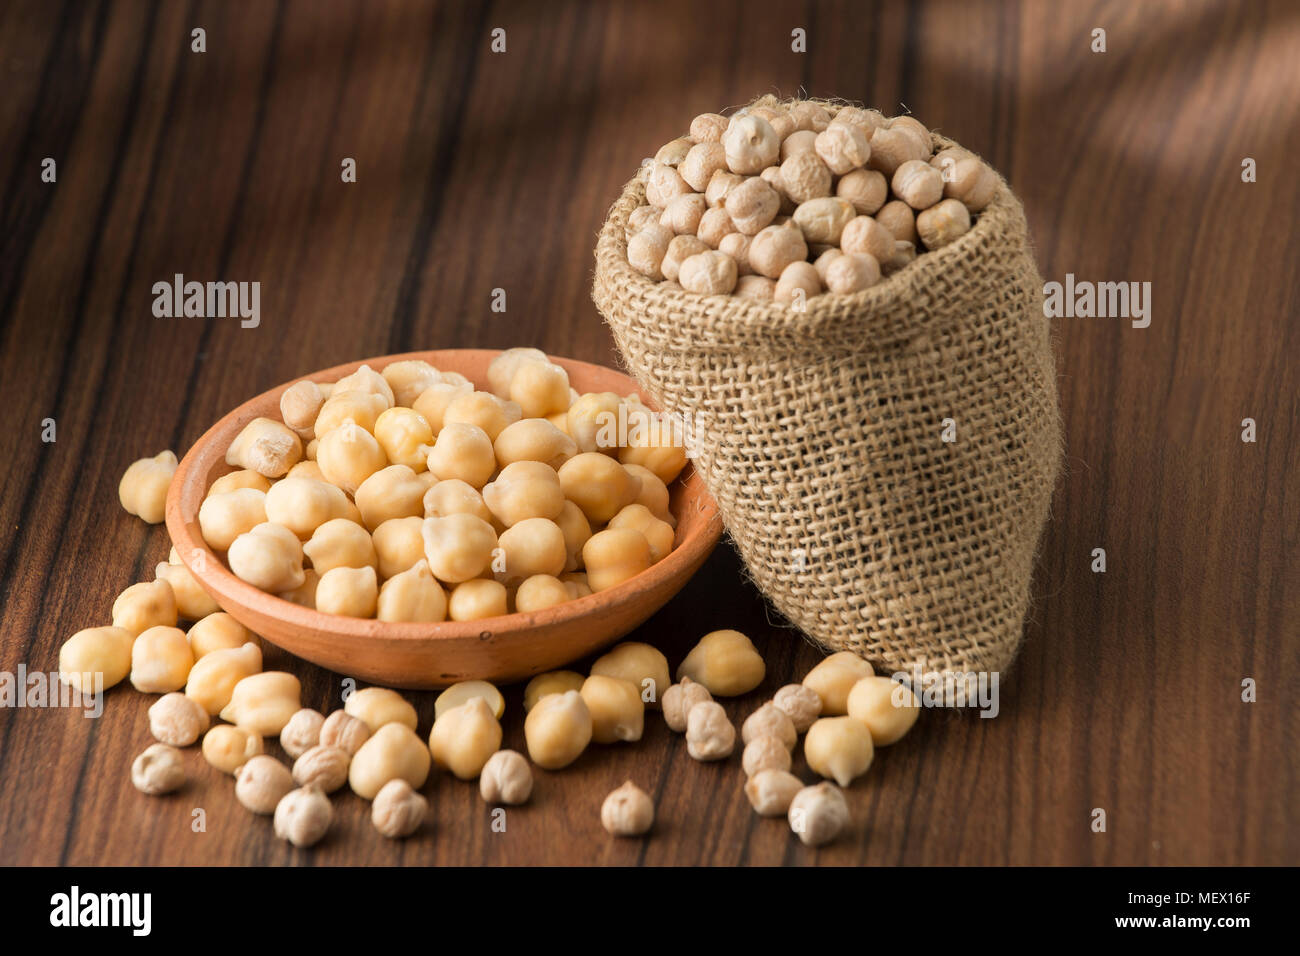 grains of chickpeas, (Cicer arietinum) in bowl on the table Stock Photo